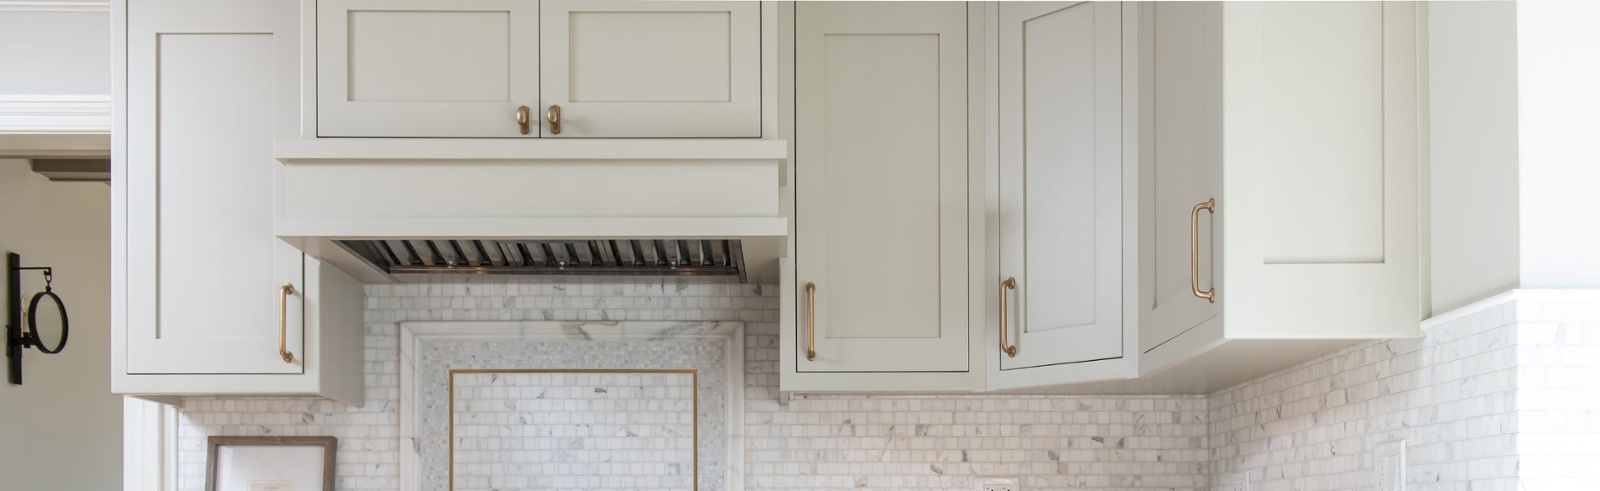 Revere Pewter kitchen cabinet color of the year paired with hale navy